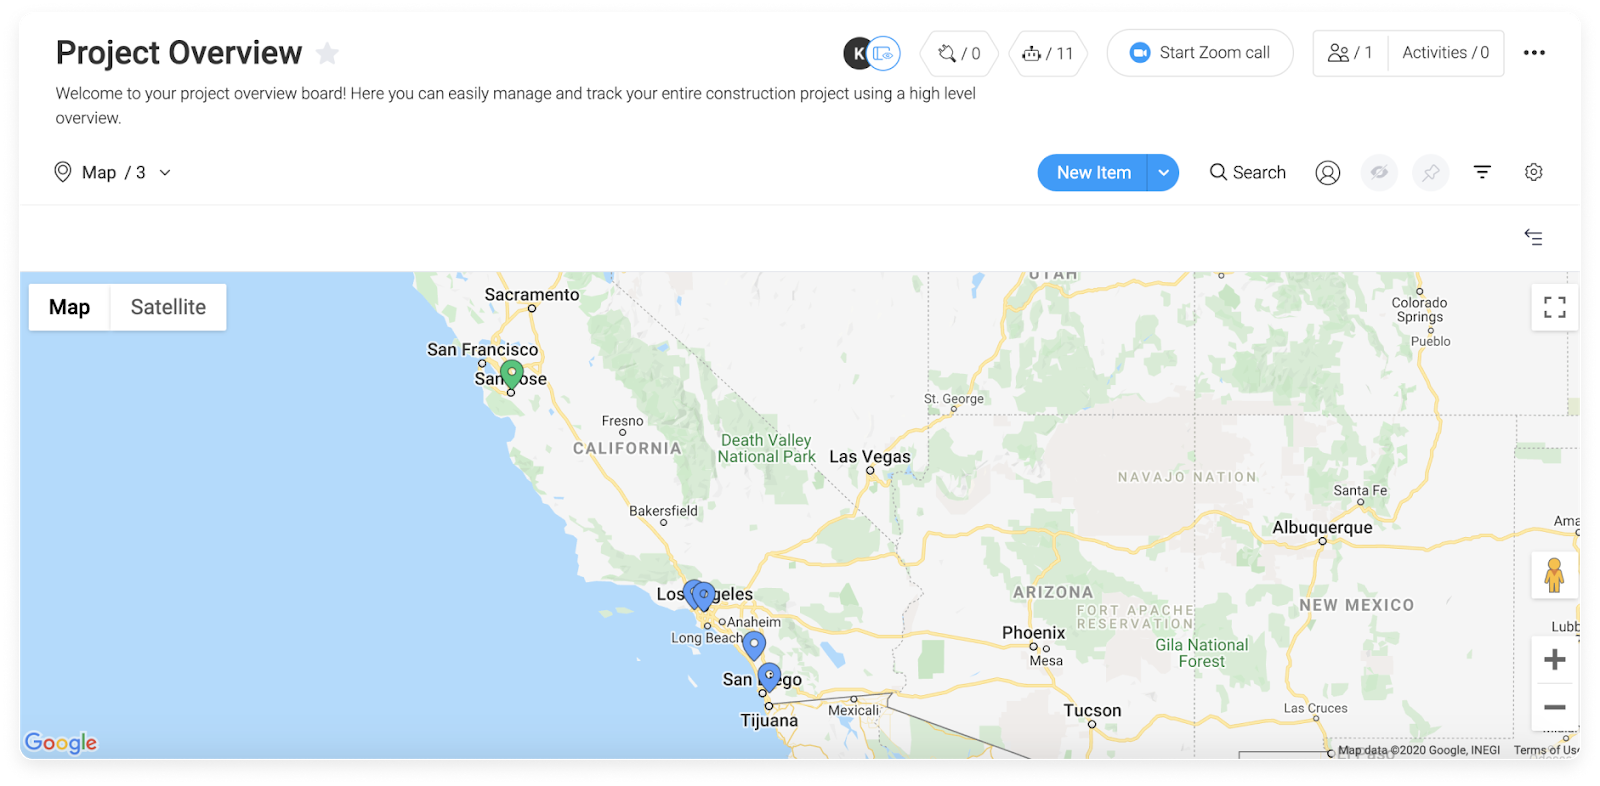 monday.com allows users to view their project locations